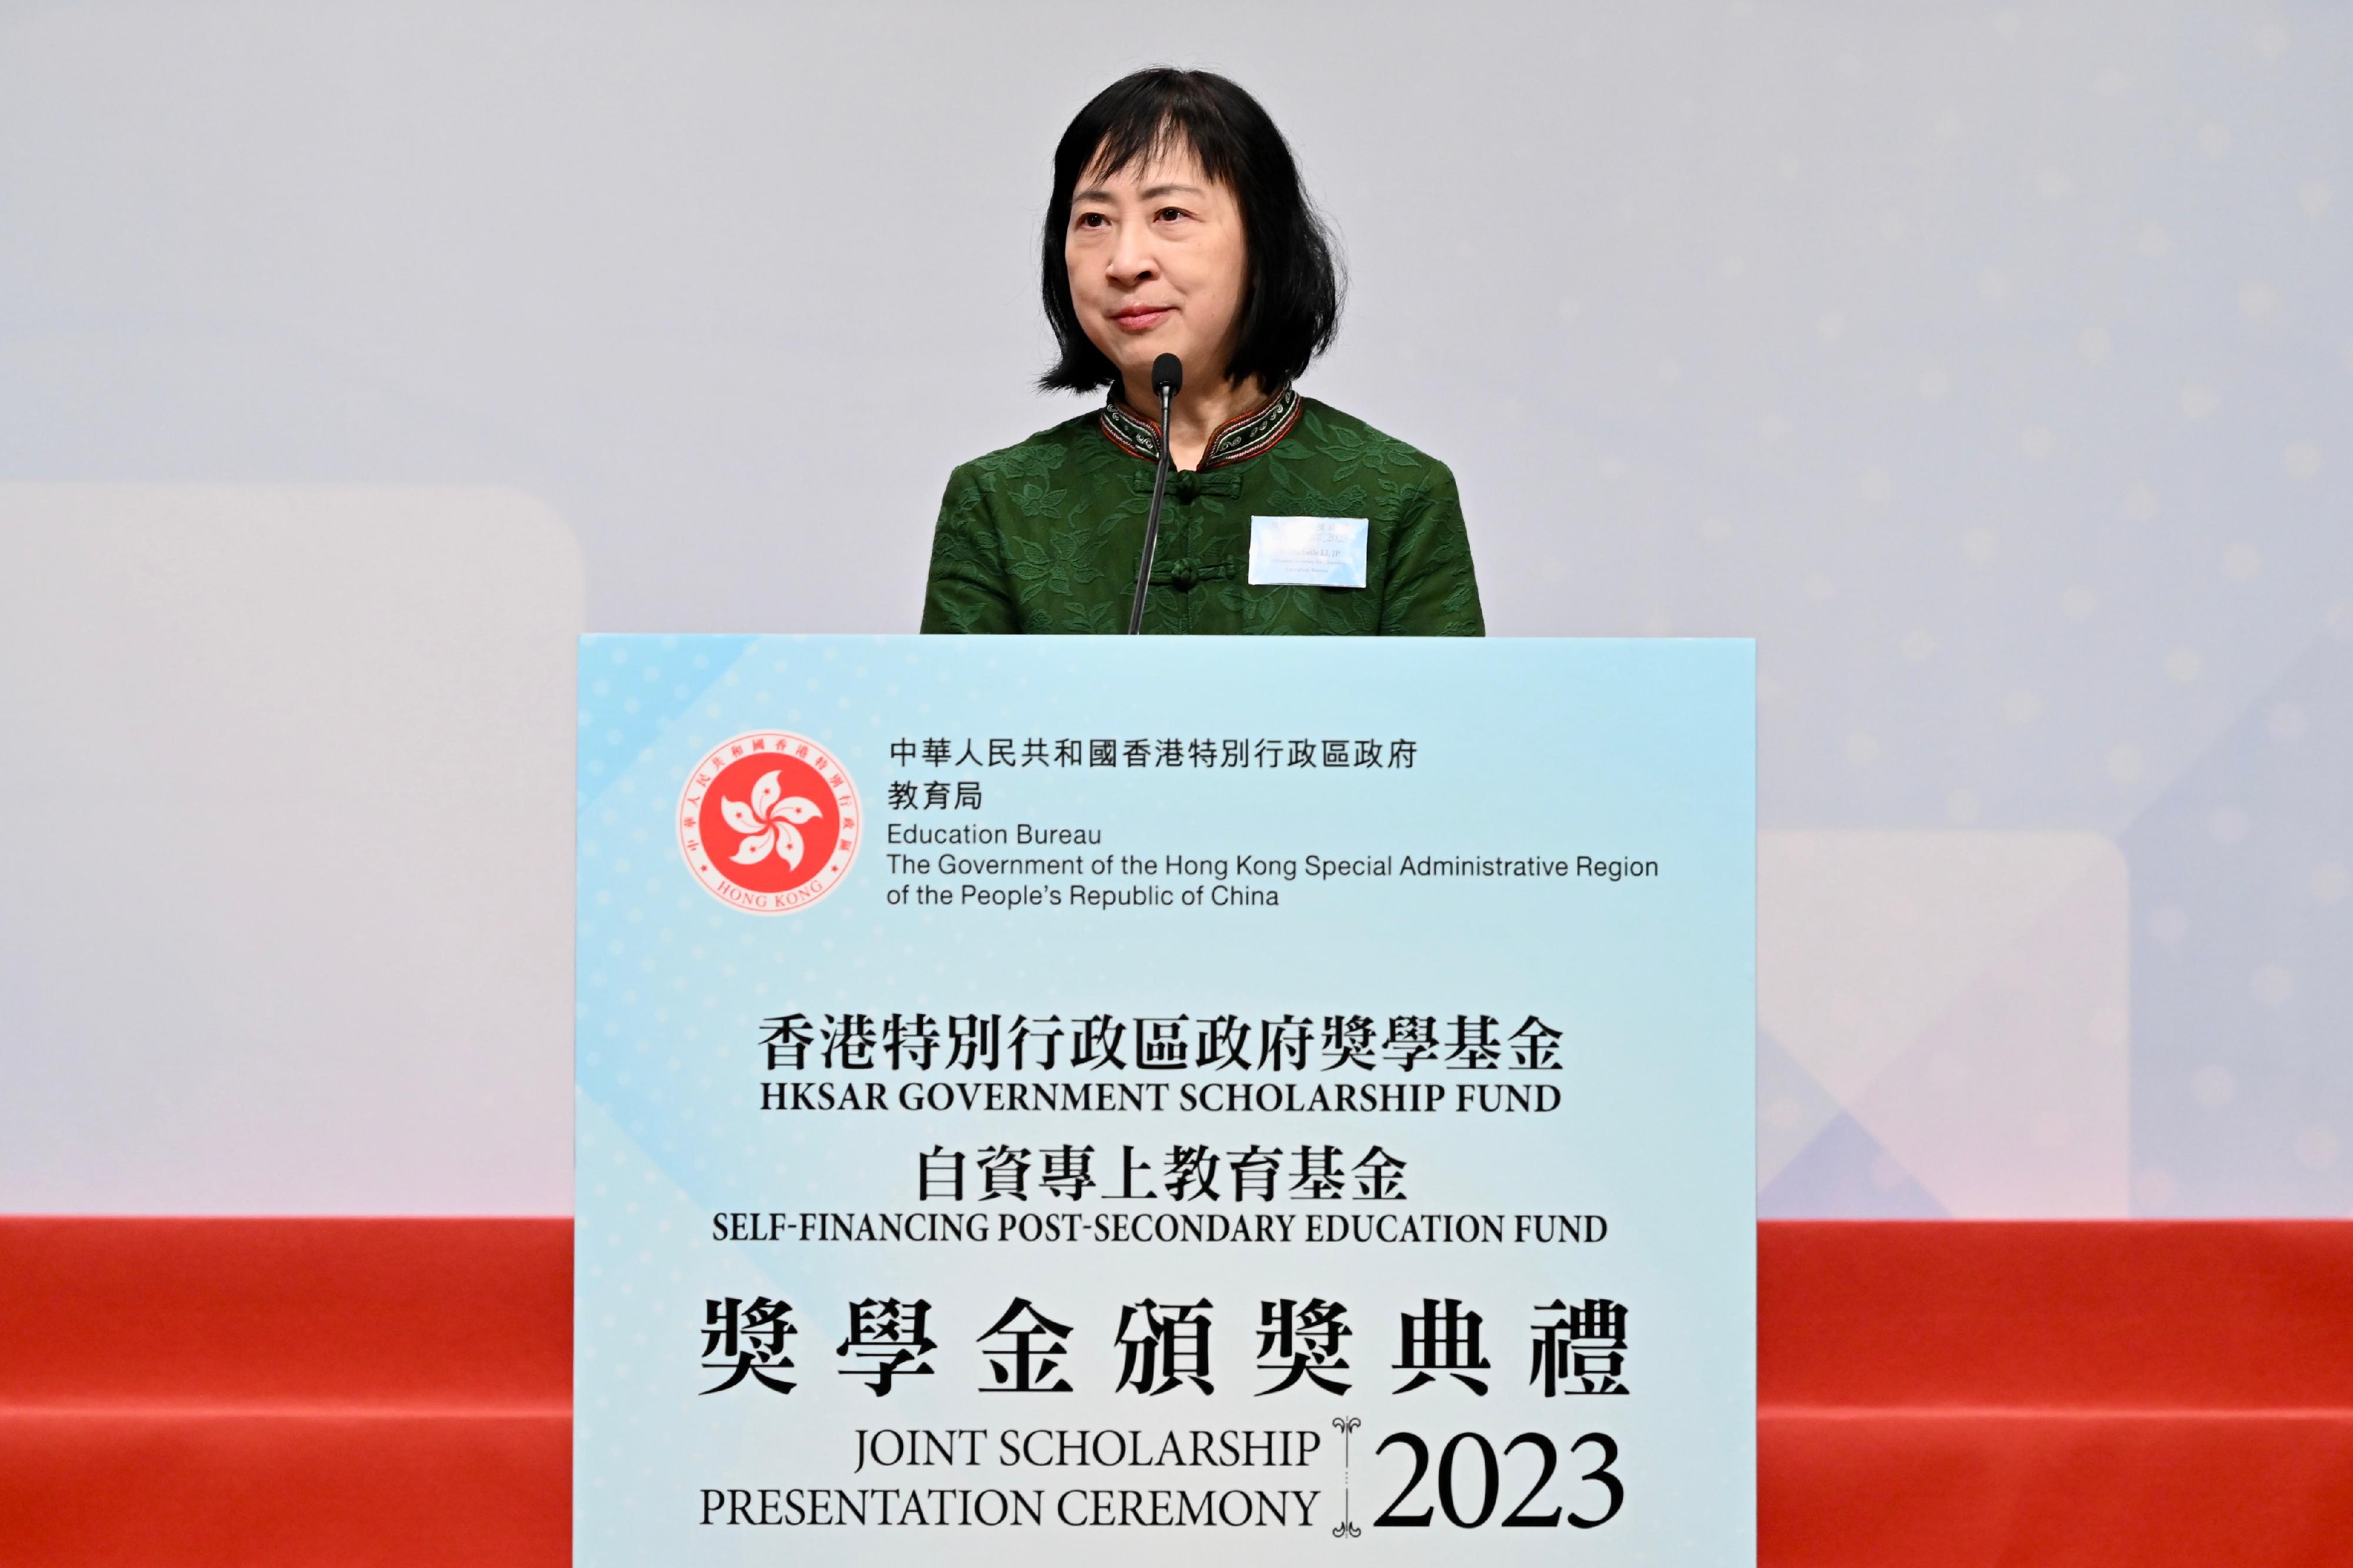 The Permanent Secretary for Education, Ms Michelle Li, speaks at the HKSAR Government Scholarship Fund and Self-financing Post-secondary Education Fund Joint Scholarship Presentation Ceremony today (April 25).